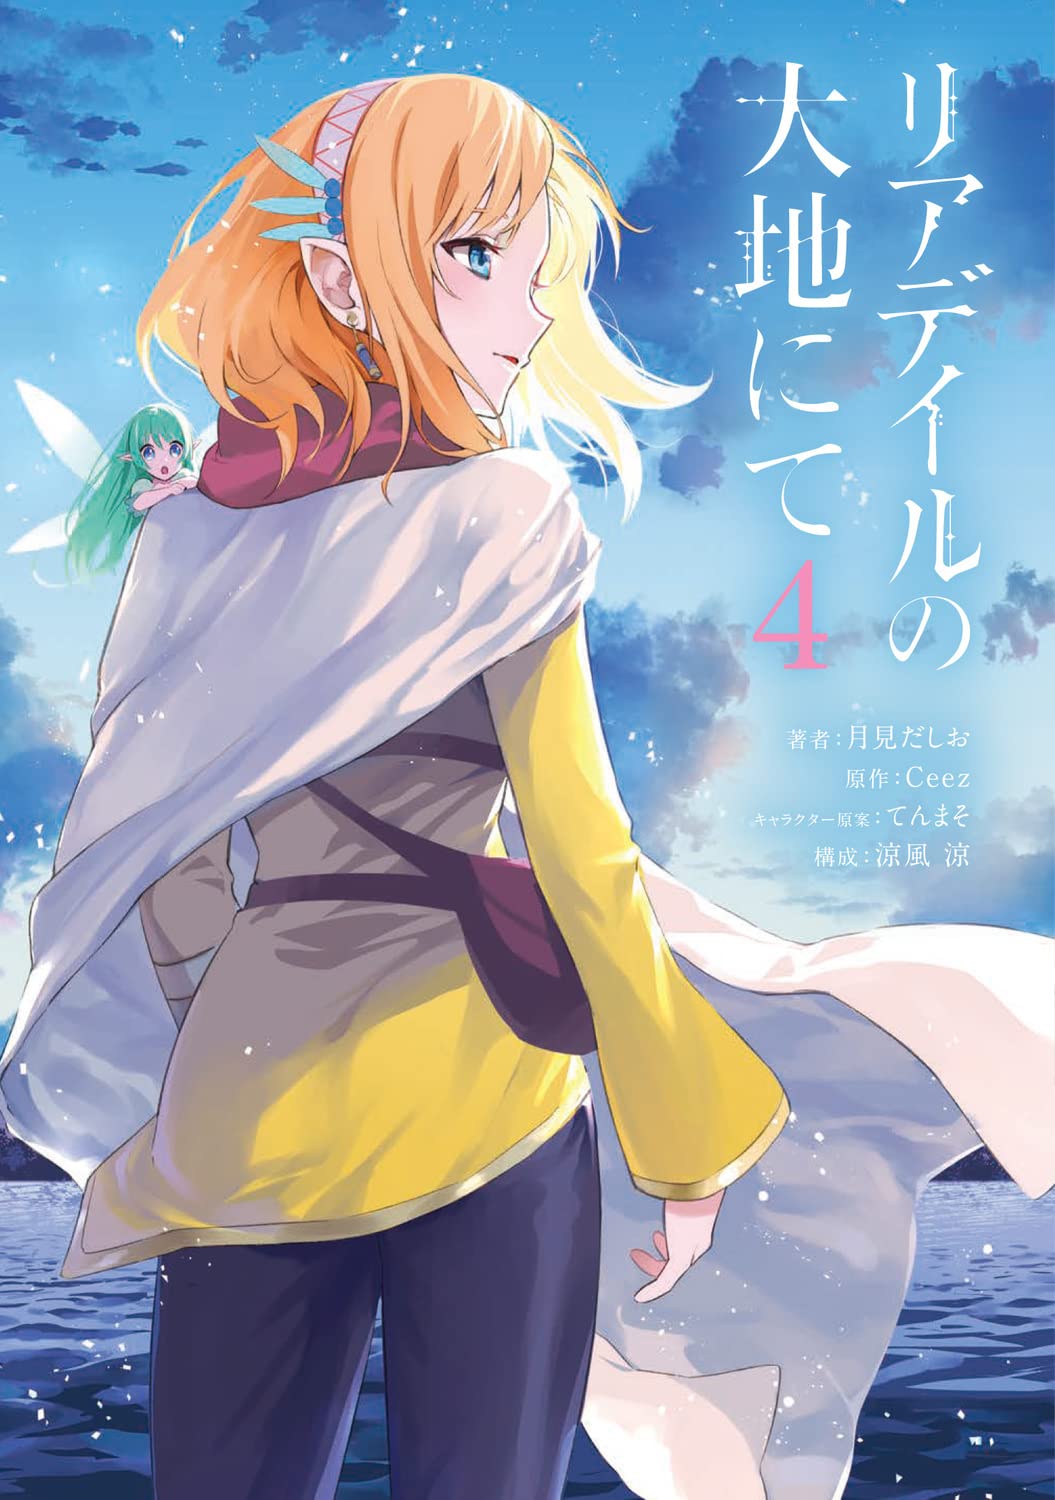 Read World of Leadale by Ceez Free On MangaKakalot - Chapter 4.6: Anime  Announcement